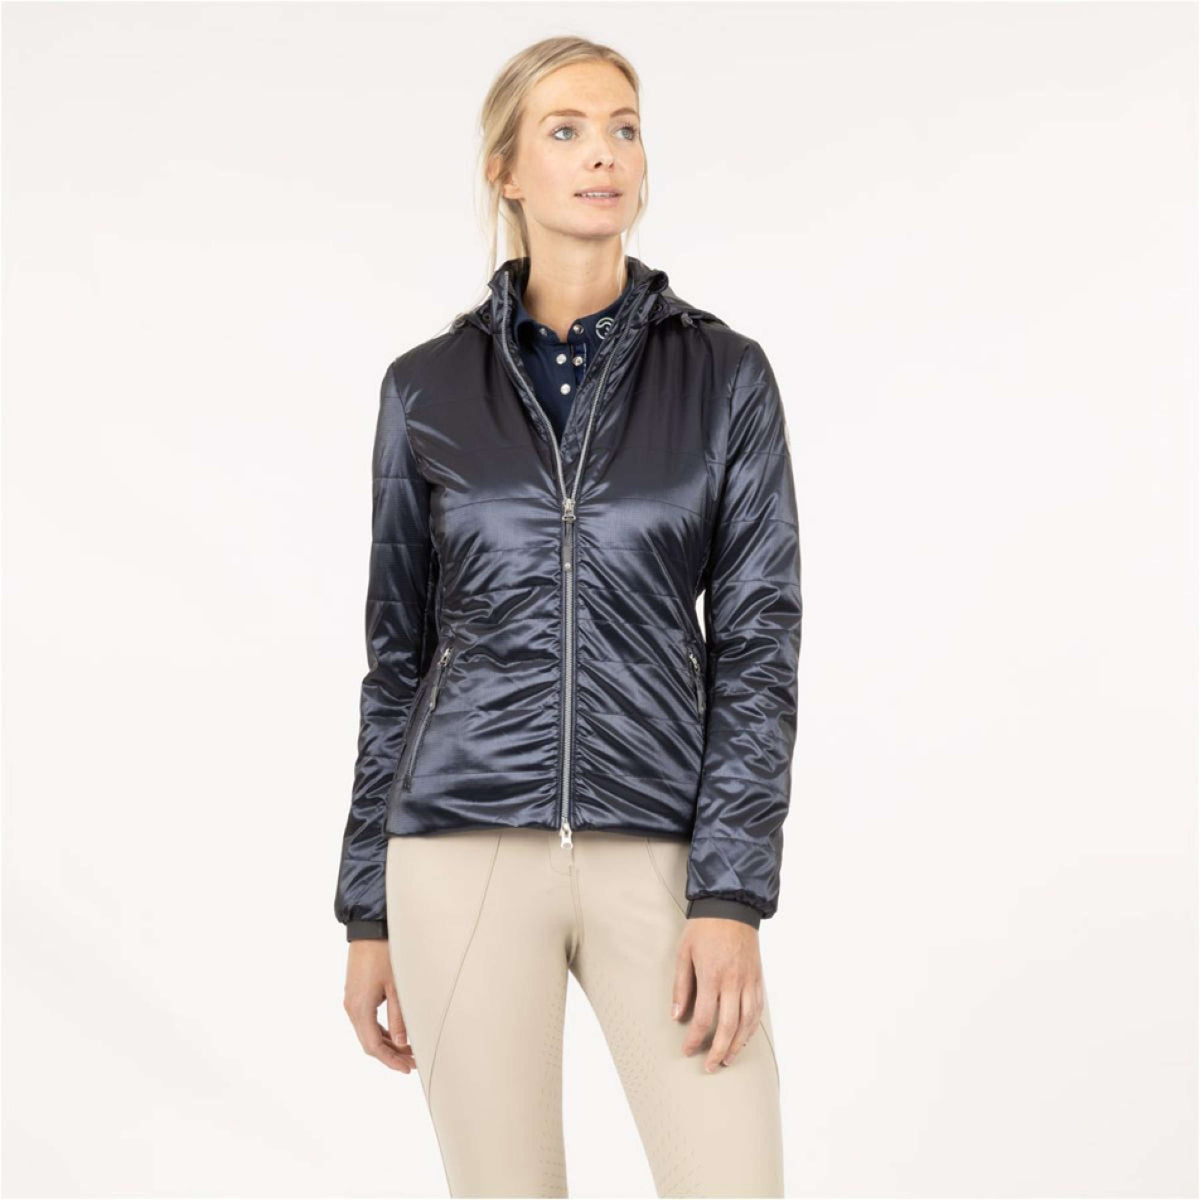 ANKY Jacke Quilted Dark Navy